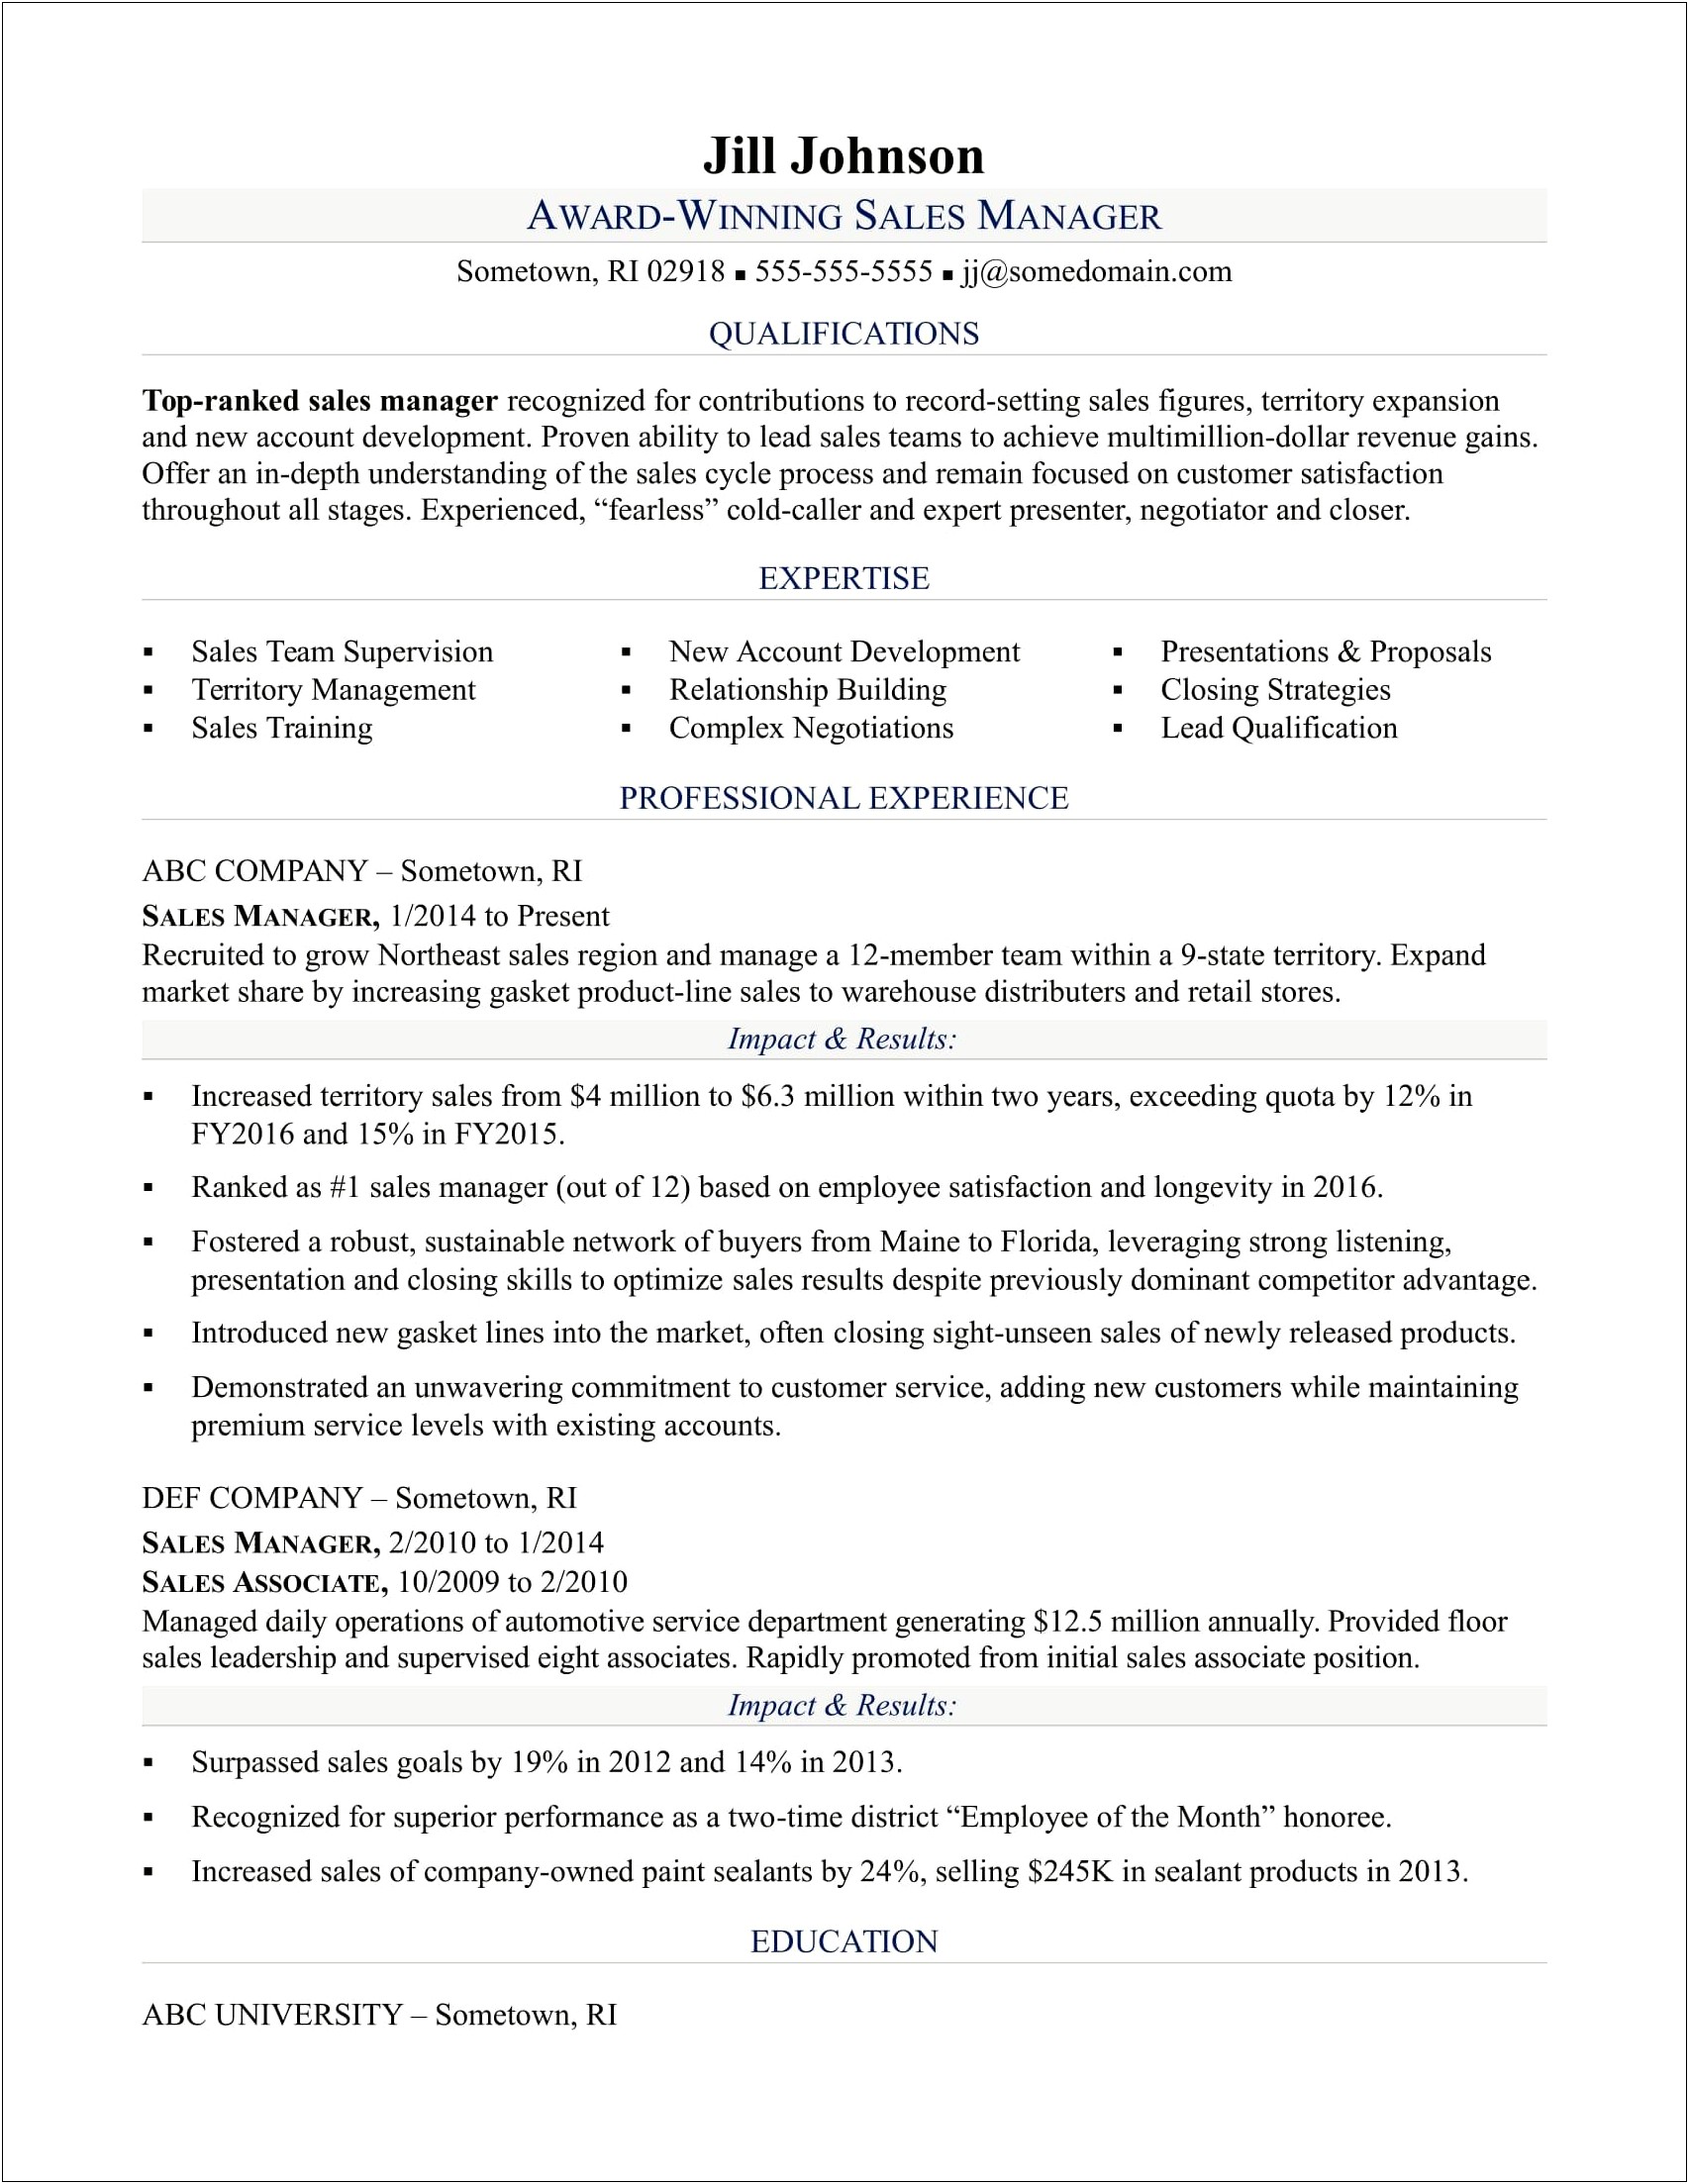 Resume Summary Examples For Business Management